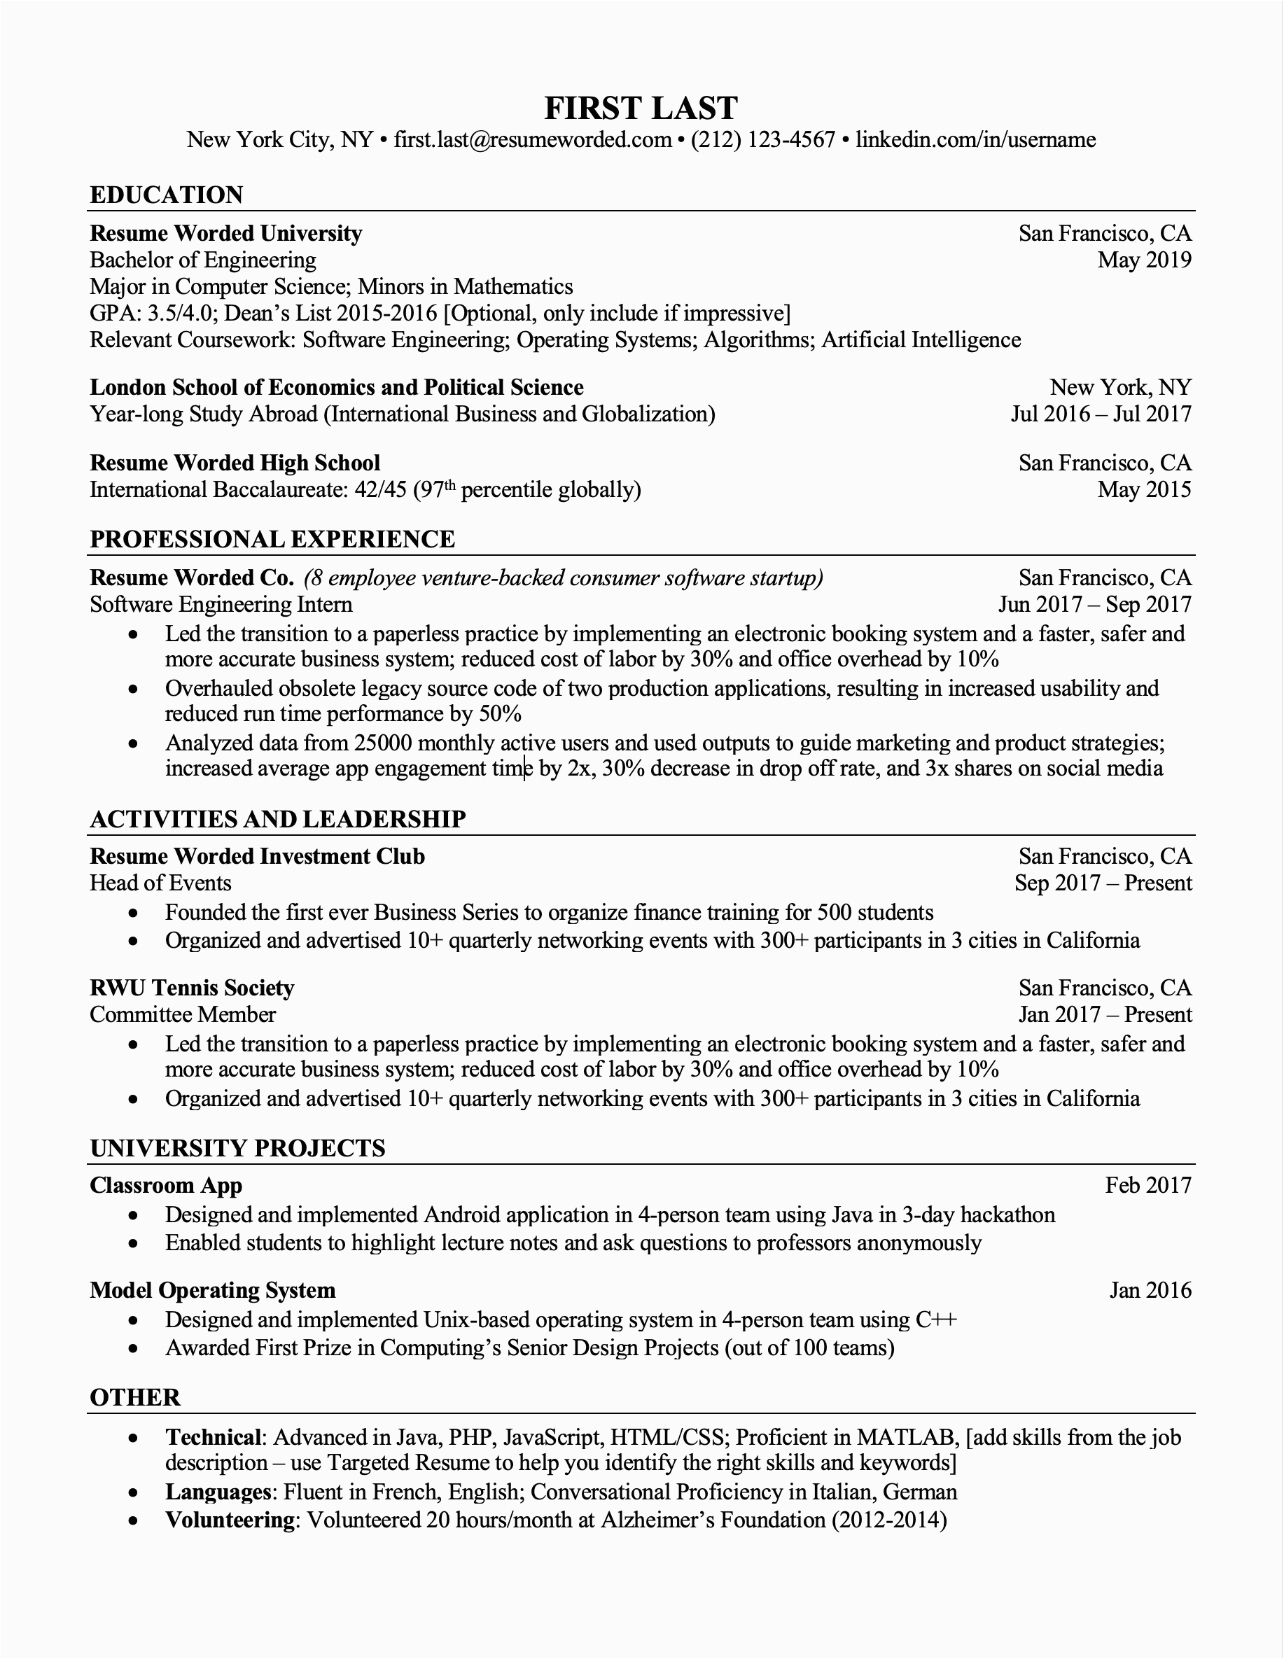 Resume Templates for Little Job Experience Resume Template Little Work Experience why is Resume